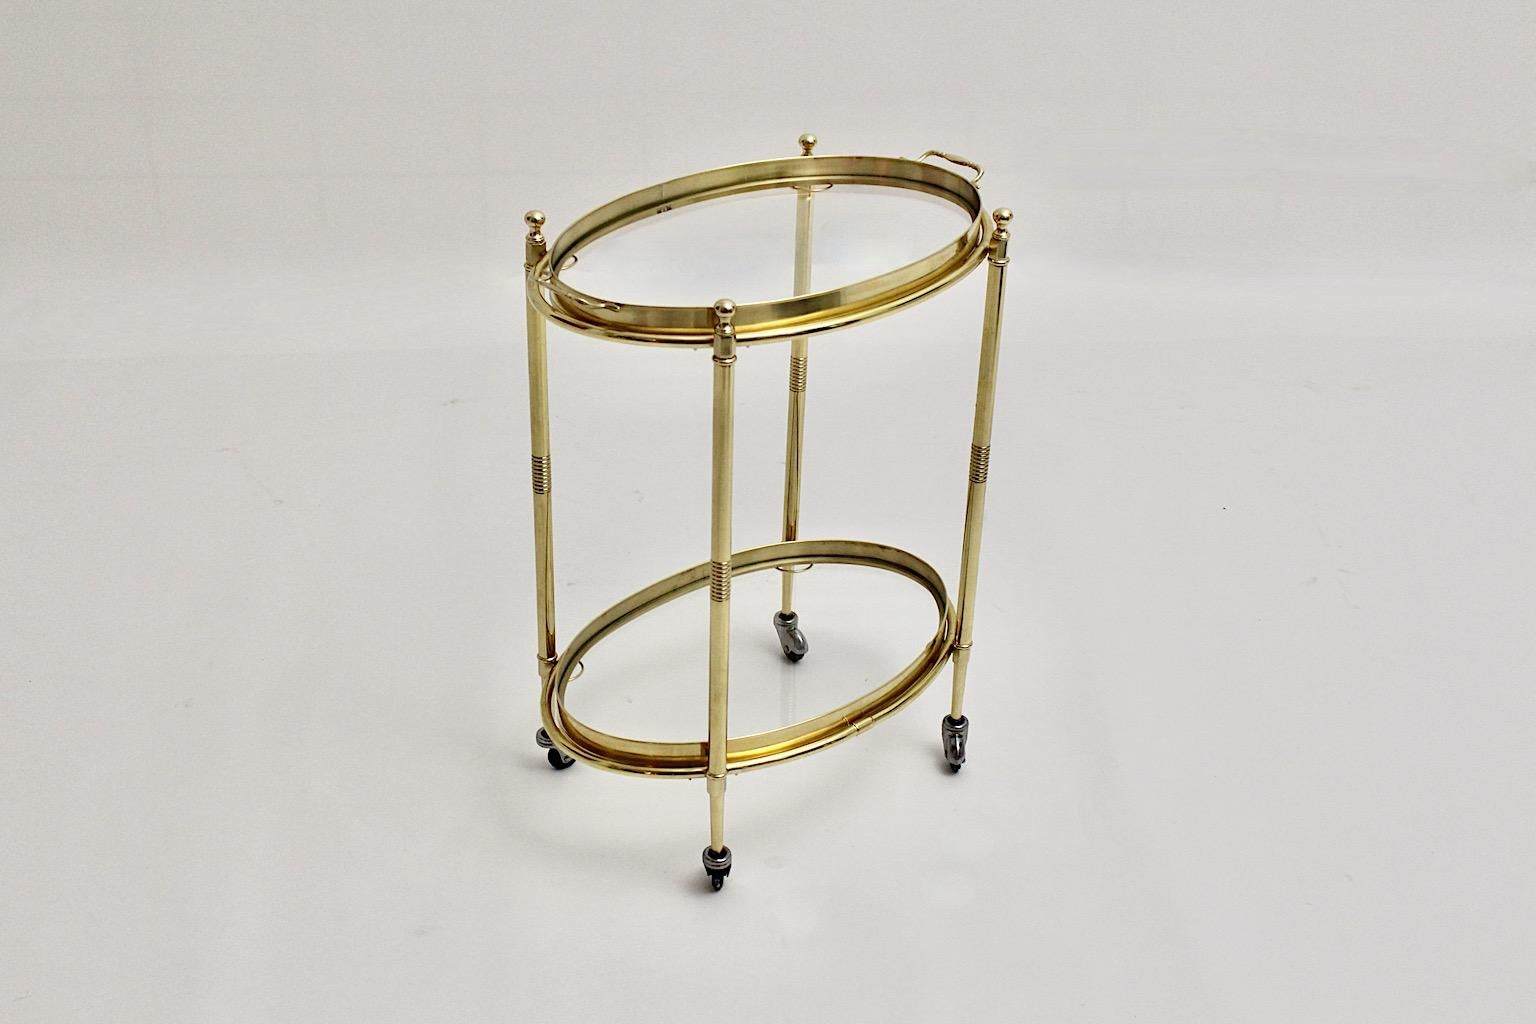 Hollywood Regency Style vintage bar cart or serving trolley or side table from brass and clear glass Italy 1970s.
The elegant and graceful brass bar cart shows 2 removable trays with clear glass and brass frame, while the bar cart has 4 wheels for